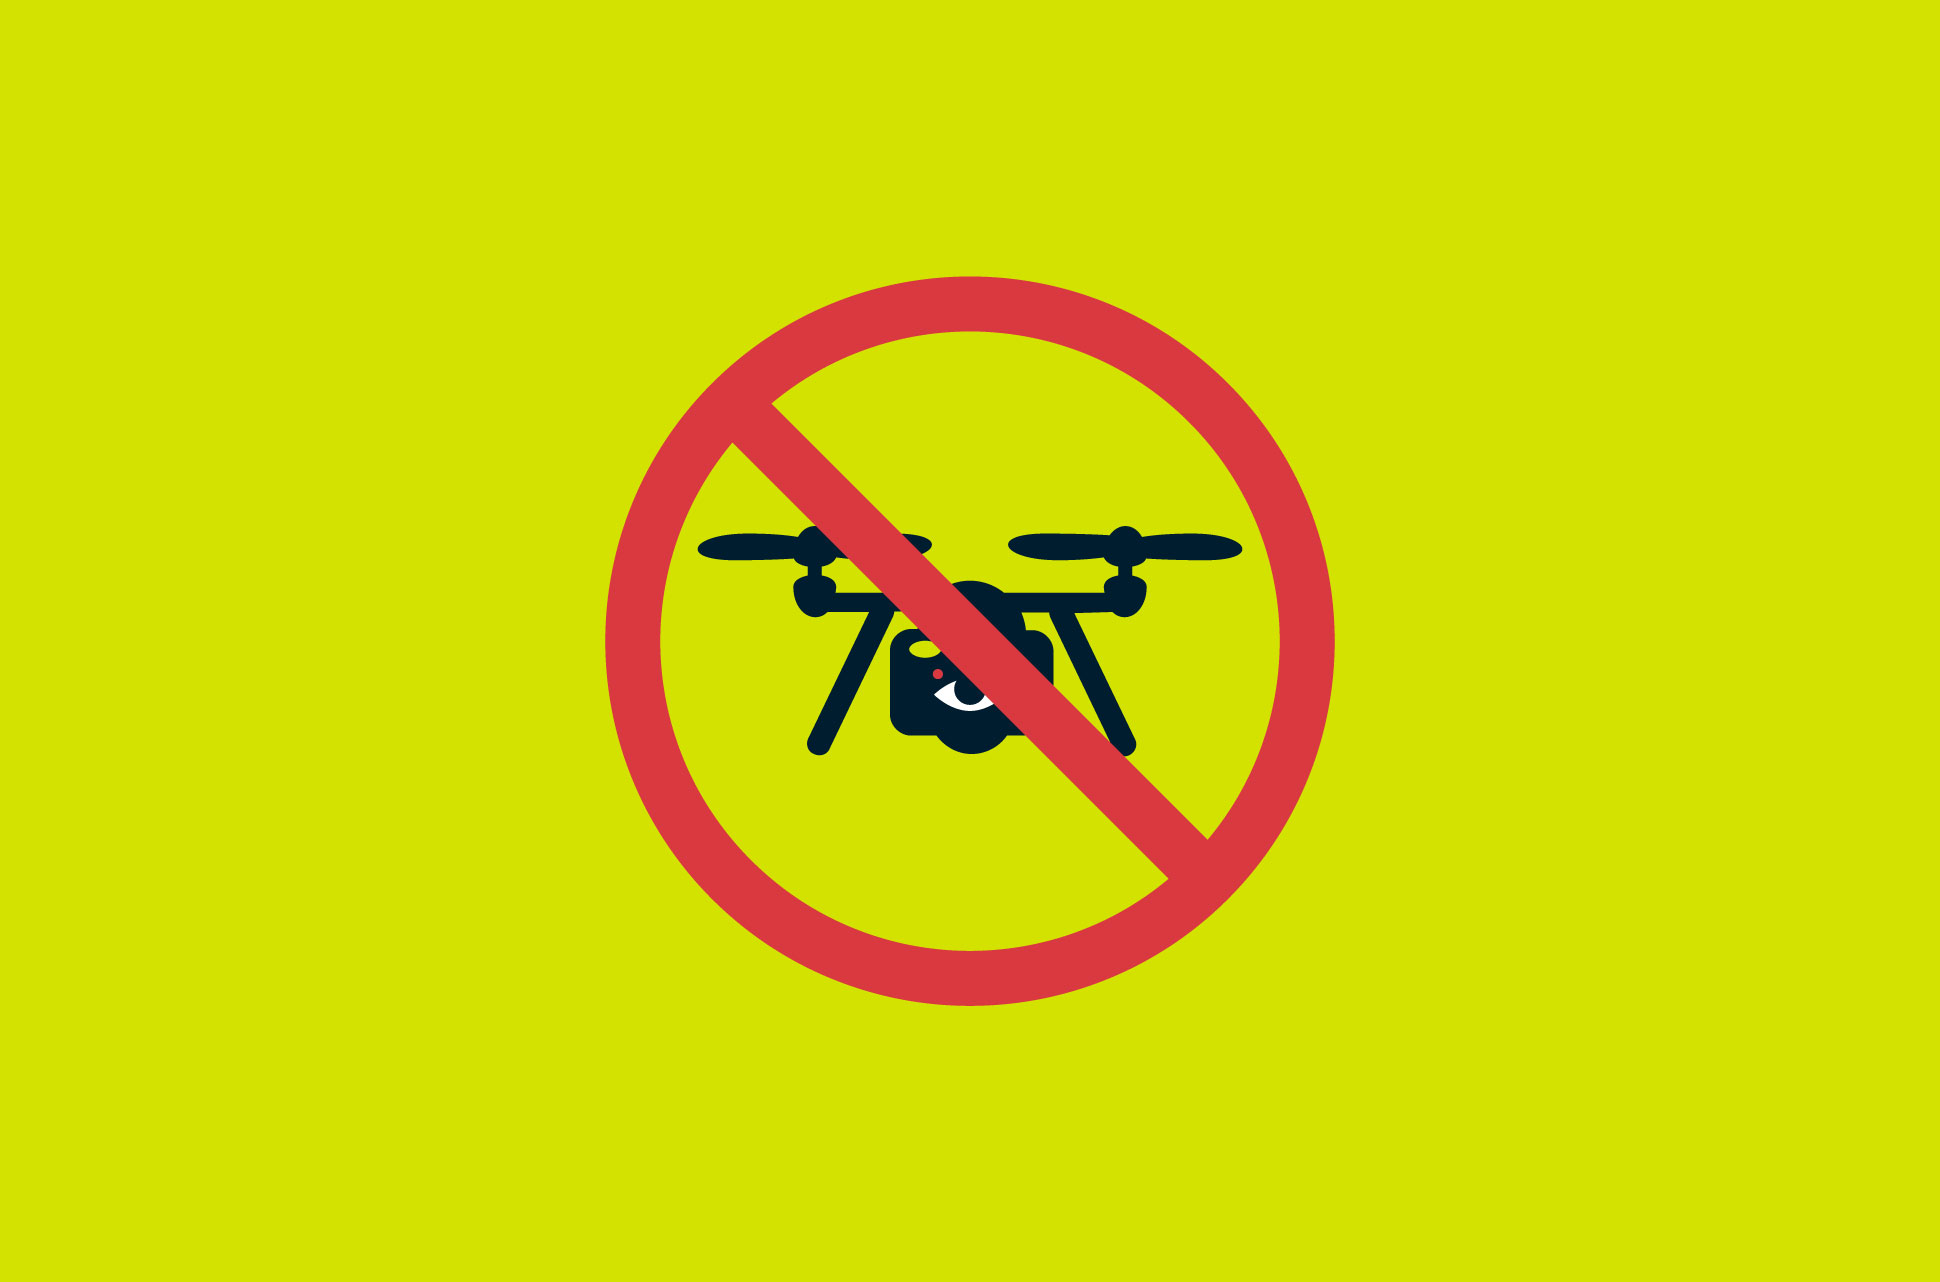 4 Ways To Hide From Drone Surveillance